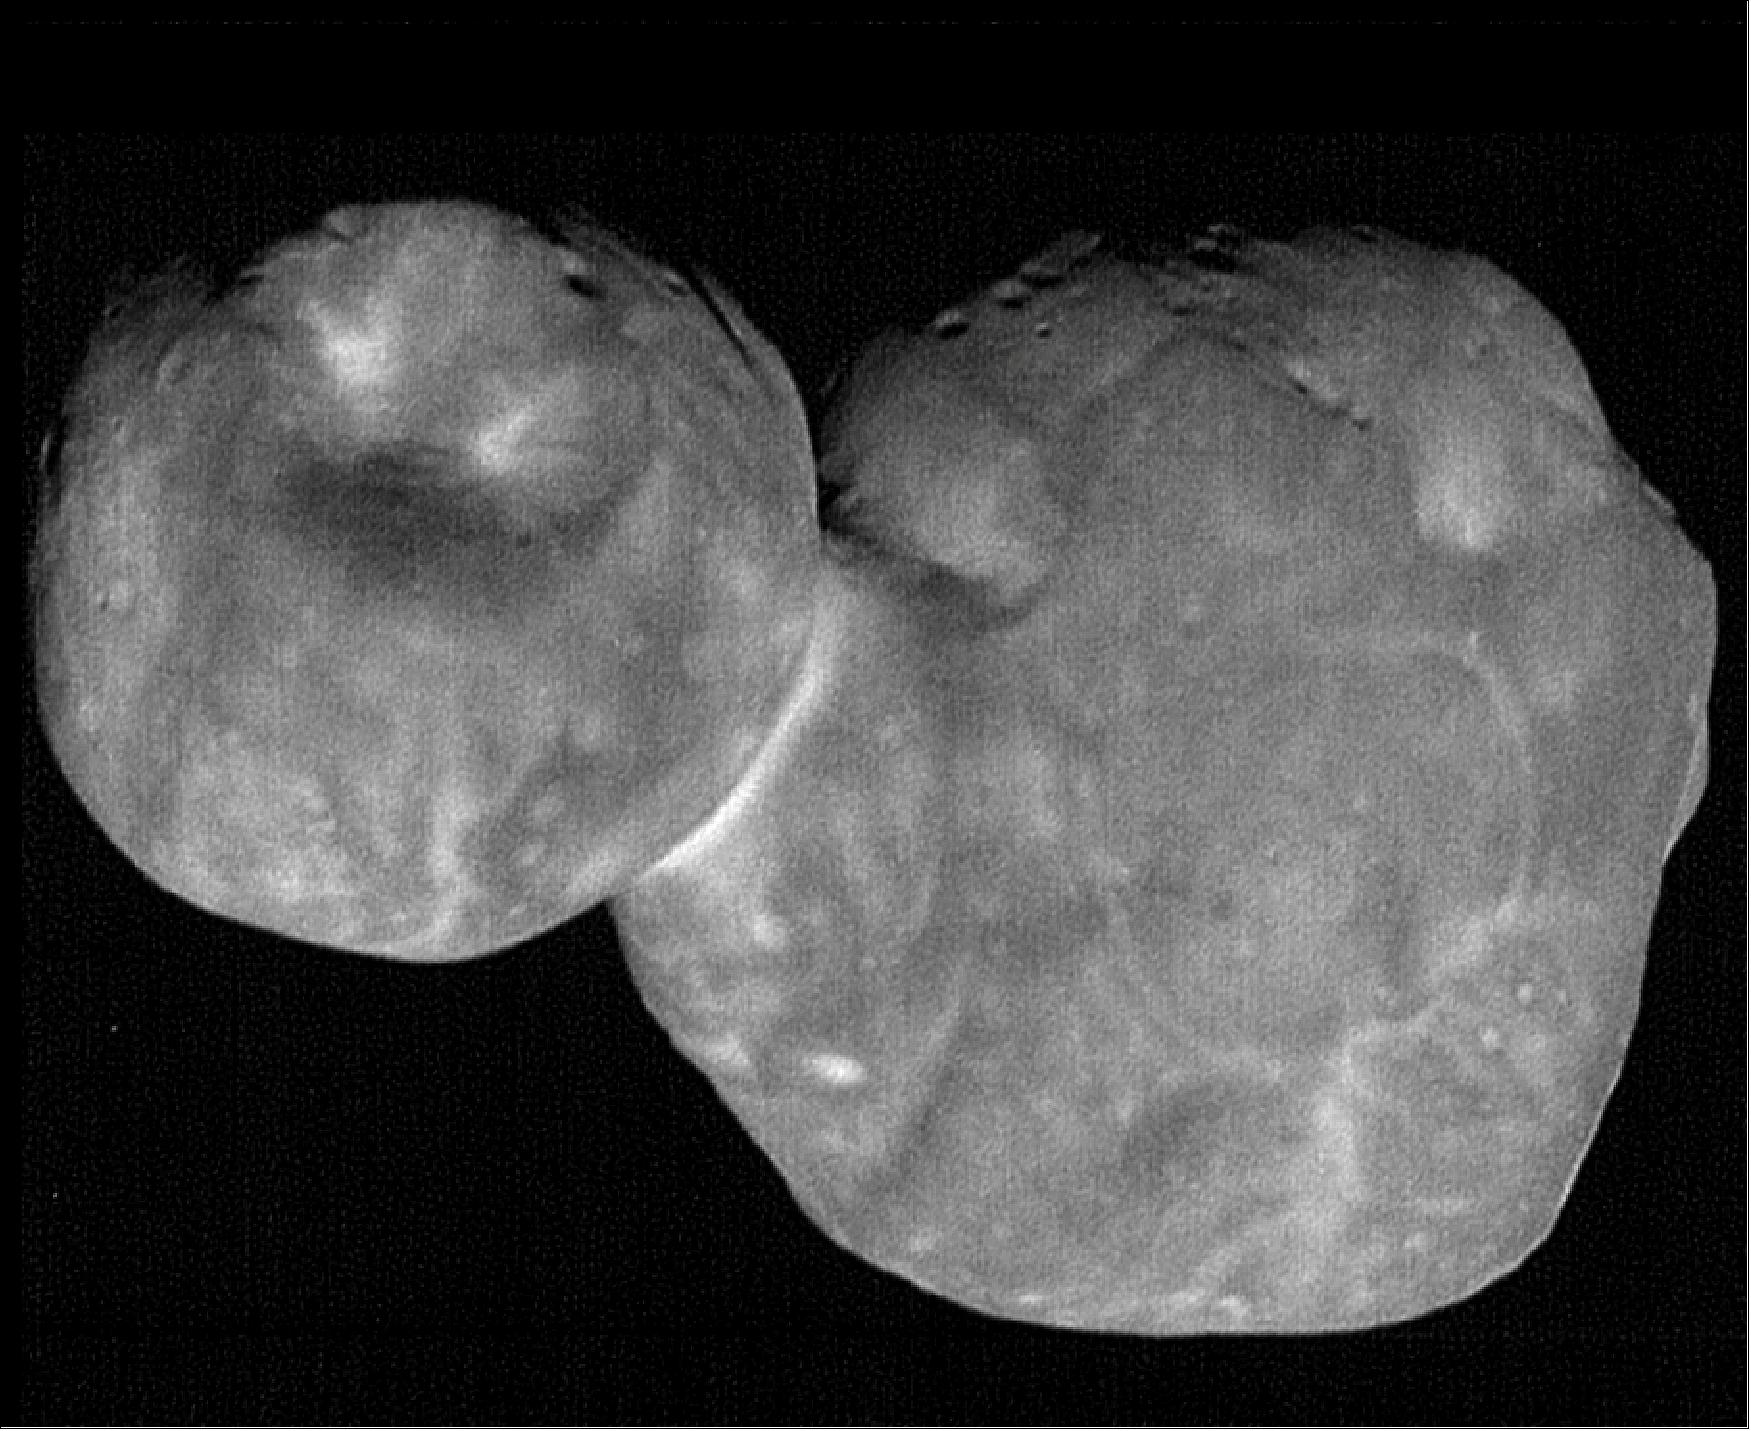 Figure 37: The most detailed images of Ultima Thule — obtained just minutes before the spacecraft's closest approach at 12:33 a.m. EST on Jan. 1 — have a resolution of about 33 m/pixel. Their combination of higher spatial resolution and a favorable viewing geometry offer an unprecedented opportunity to investigate the surface of Ultima Thule, believed to be the most primitive object ever encountered by a spacecraft. — This processed, composite picture combines nine individual images taken with the Long Range Reconnaissance Imager (LORRI), each with an exposure time of 0.025 seconds, just 6 ½ minutes before the spacecraft's closest approach to Ultima Thule (officially named 2014 MU69). The image was taken at 5:26 UT (12:26 a.m. EST) on Jan. 1, 2019, when the spacecraft was 6,628 km from Ultima Thule and 6.6 billion km from Earth. The angle between the spacecraft, Ultima Thule and the Sun – known as the "phase angle" – was 33 degrees (image credit: NASA, JHU/APL, SwRI, National Optical Astronomy Observatory)